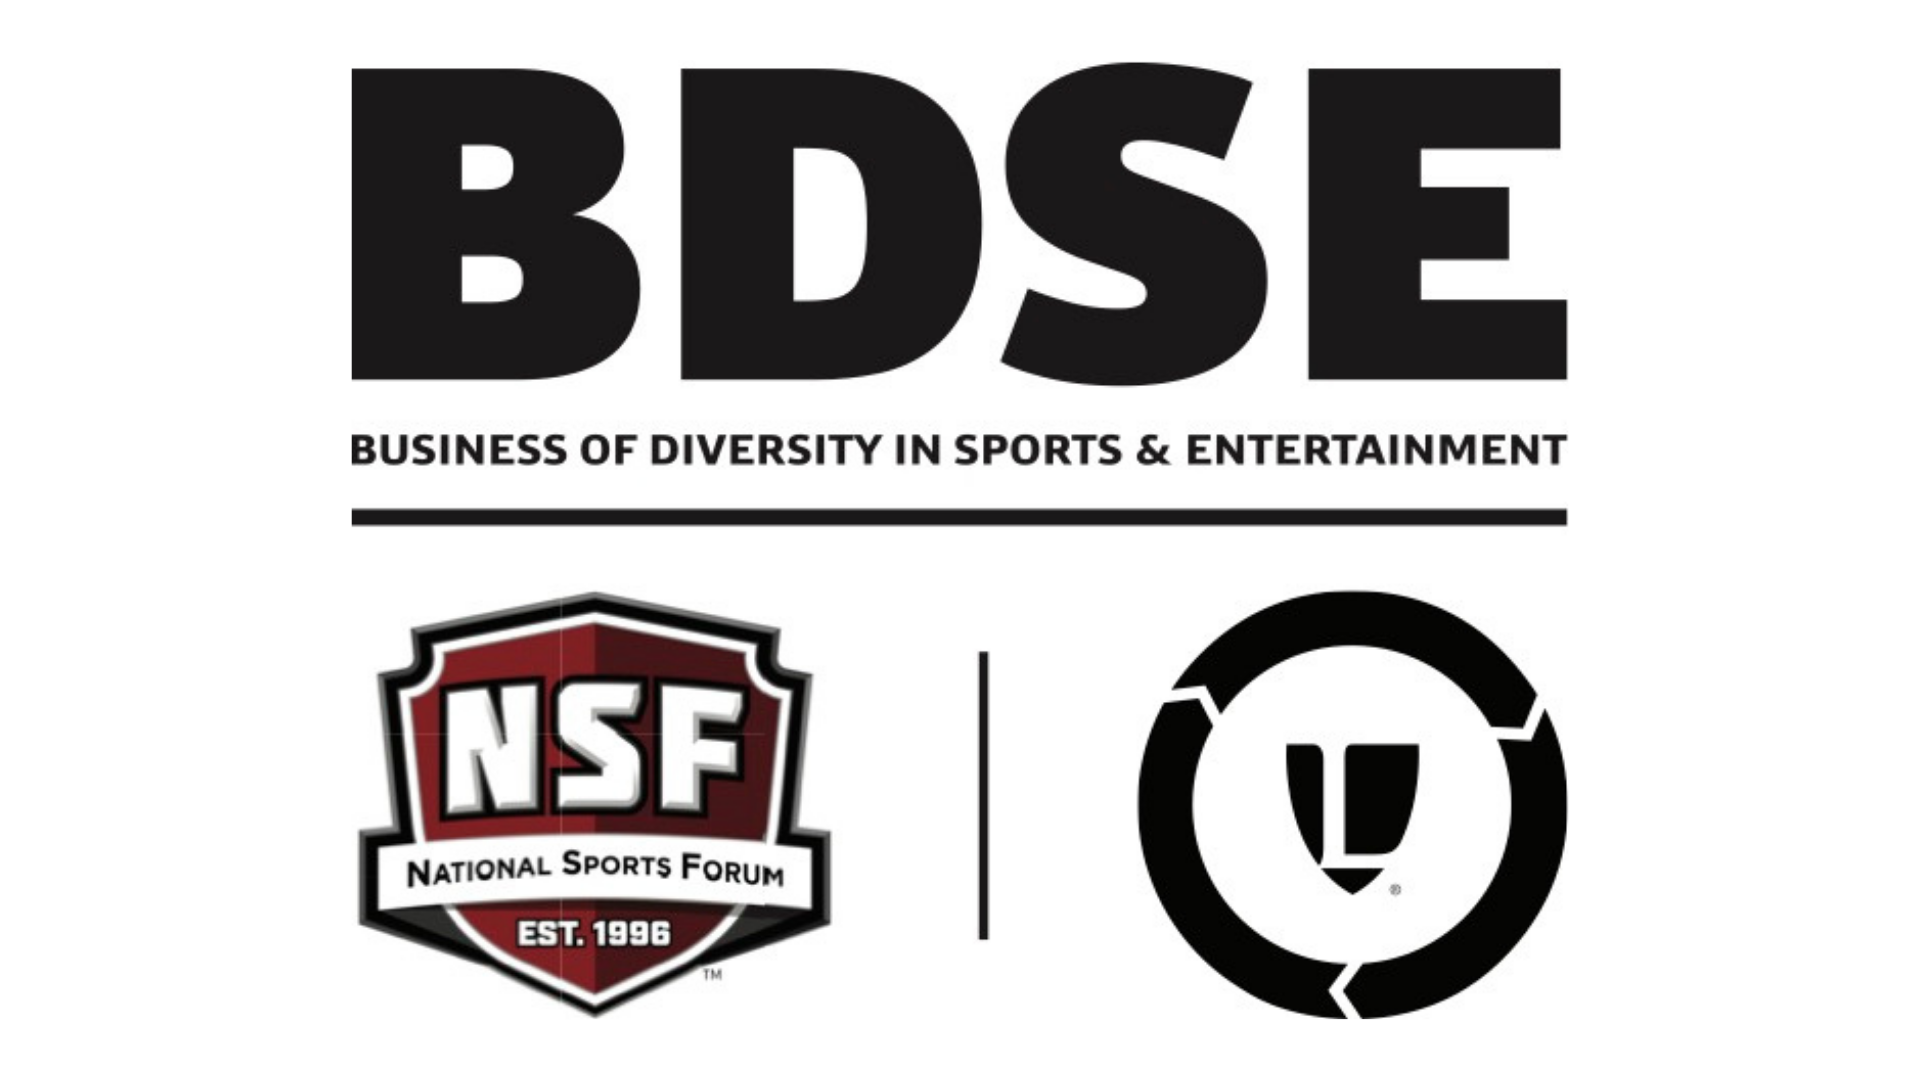 Legends to Serve as Presenting Partner of The National Sports Forum’s Business of Diversity in Sports & Entertainment Program